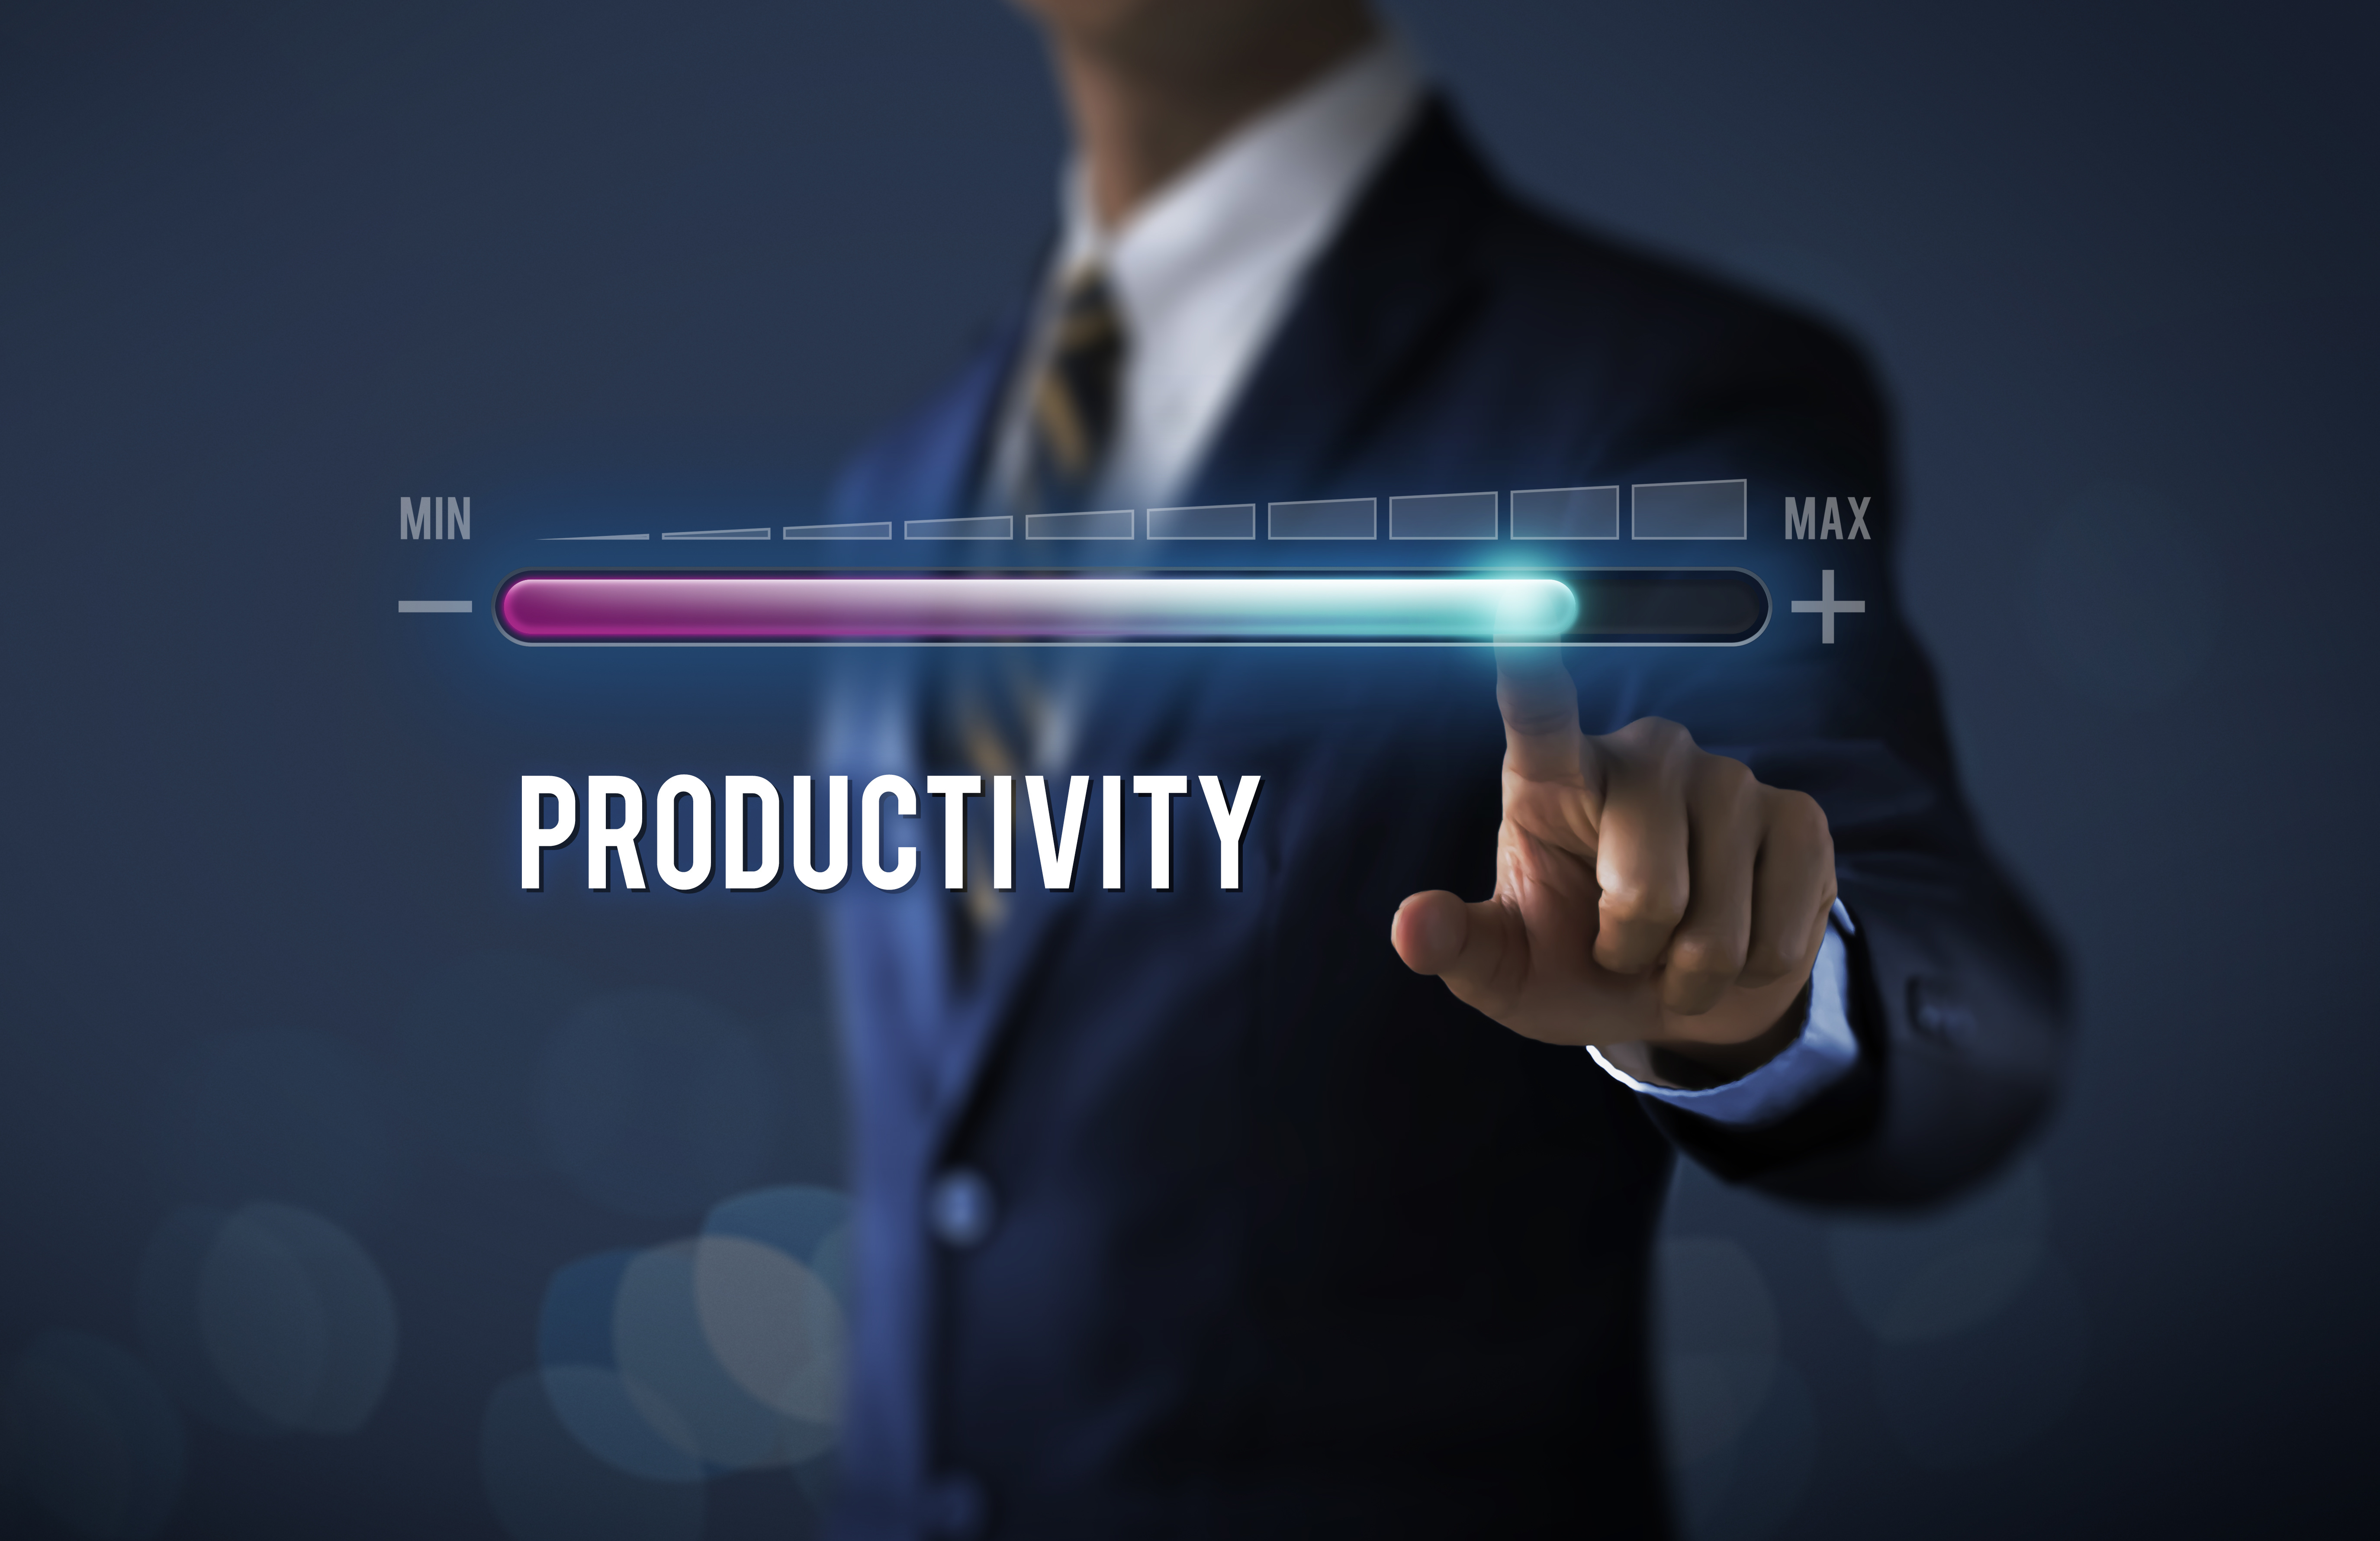 Increase productivity concept. Businessman is pulling up progress bar with the word PRODUCTIVITY on dark tone background.